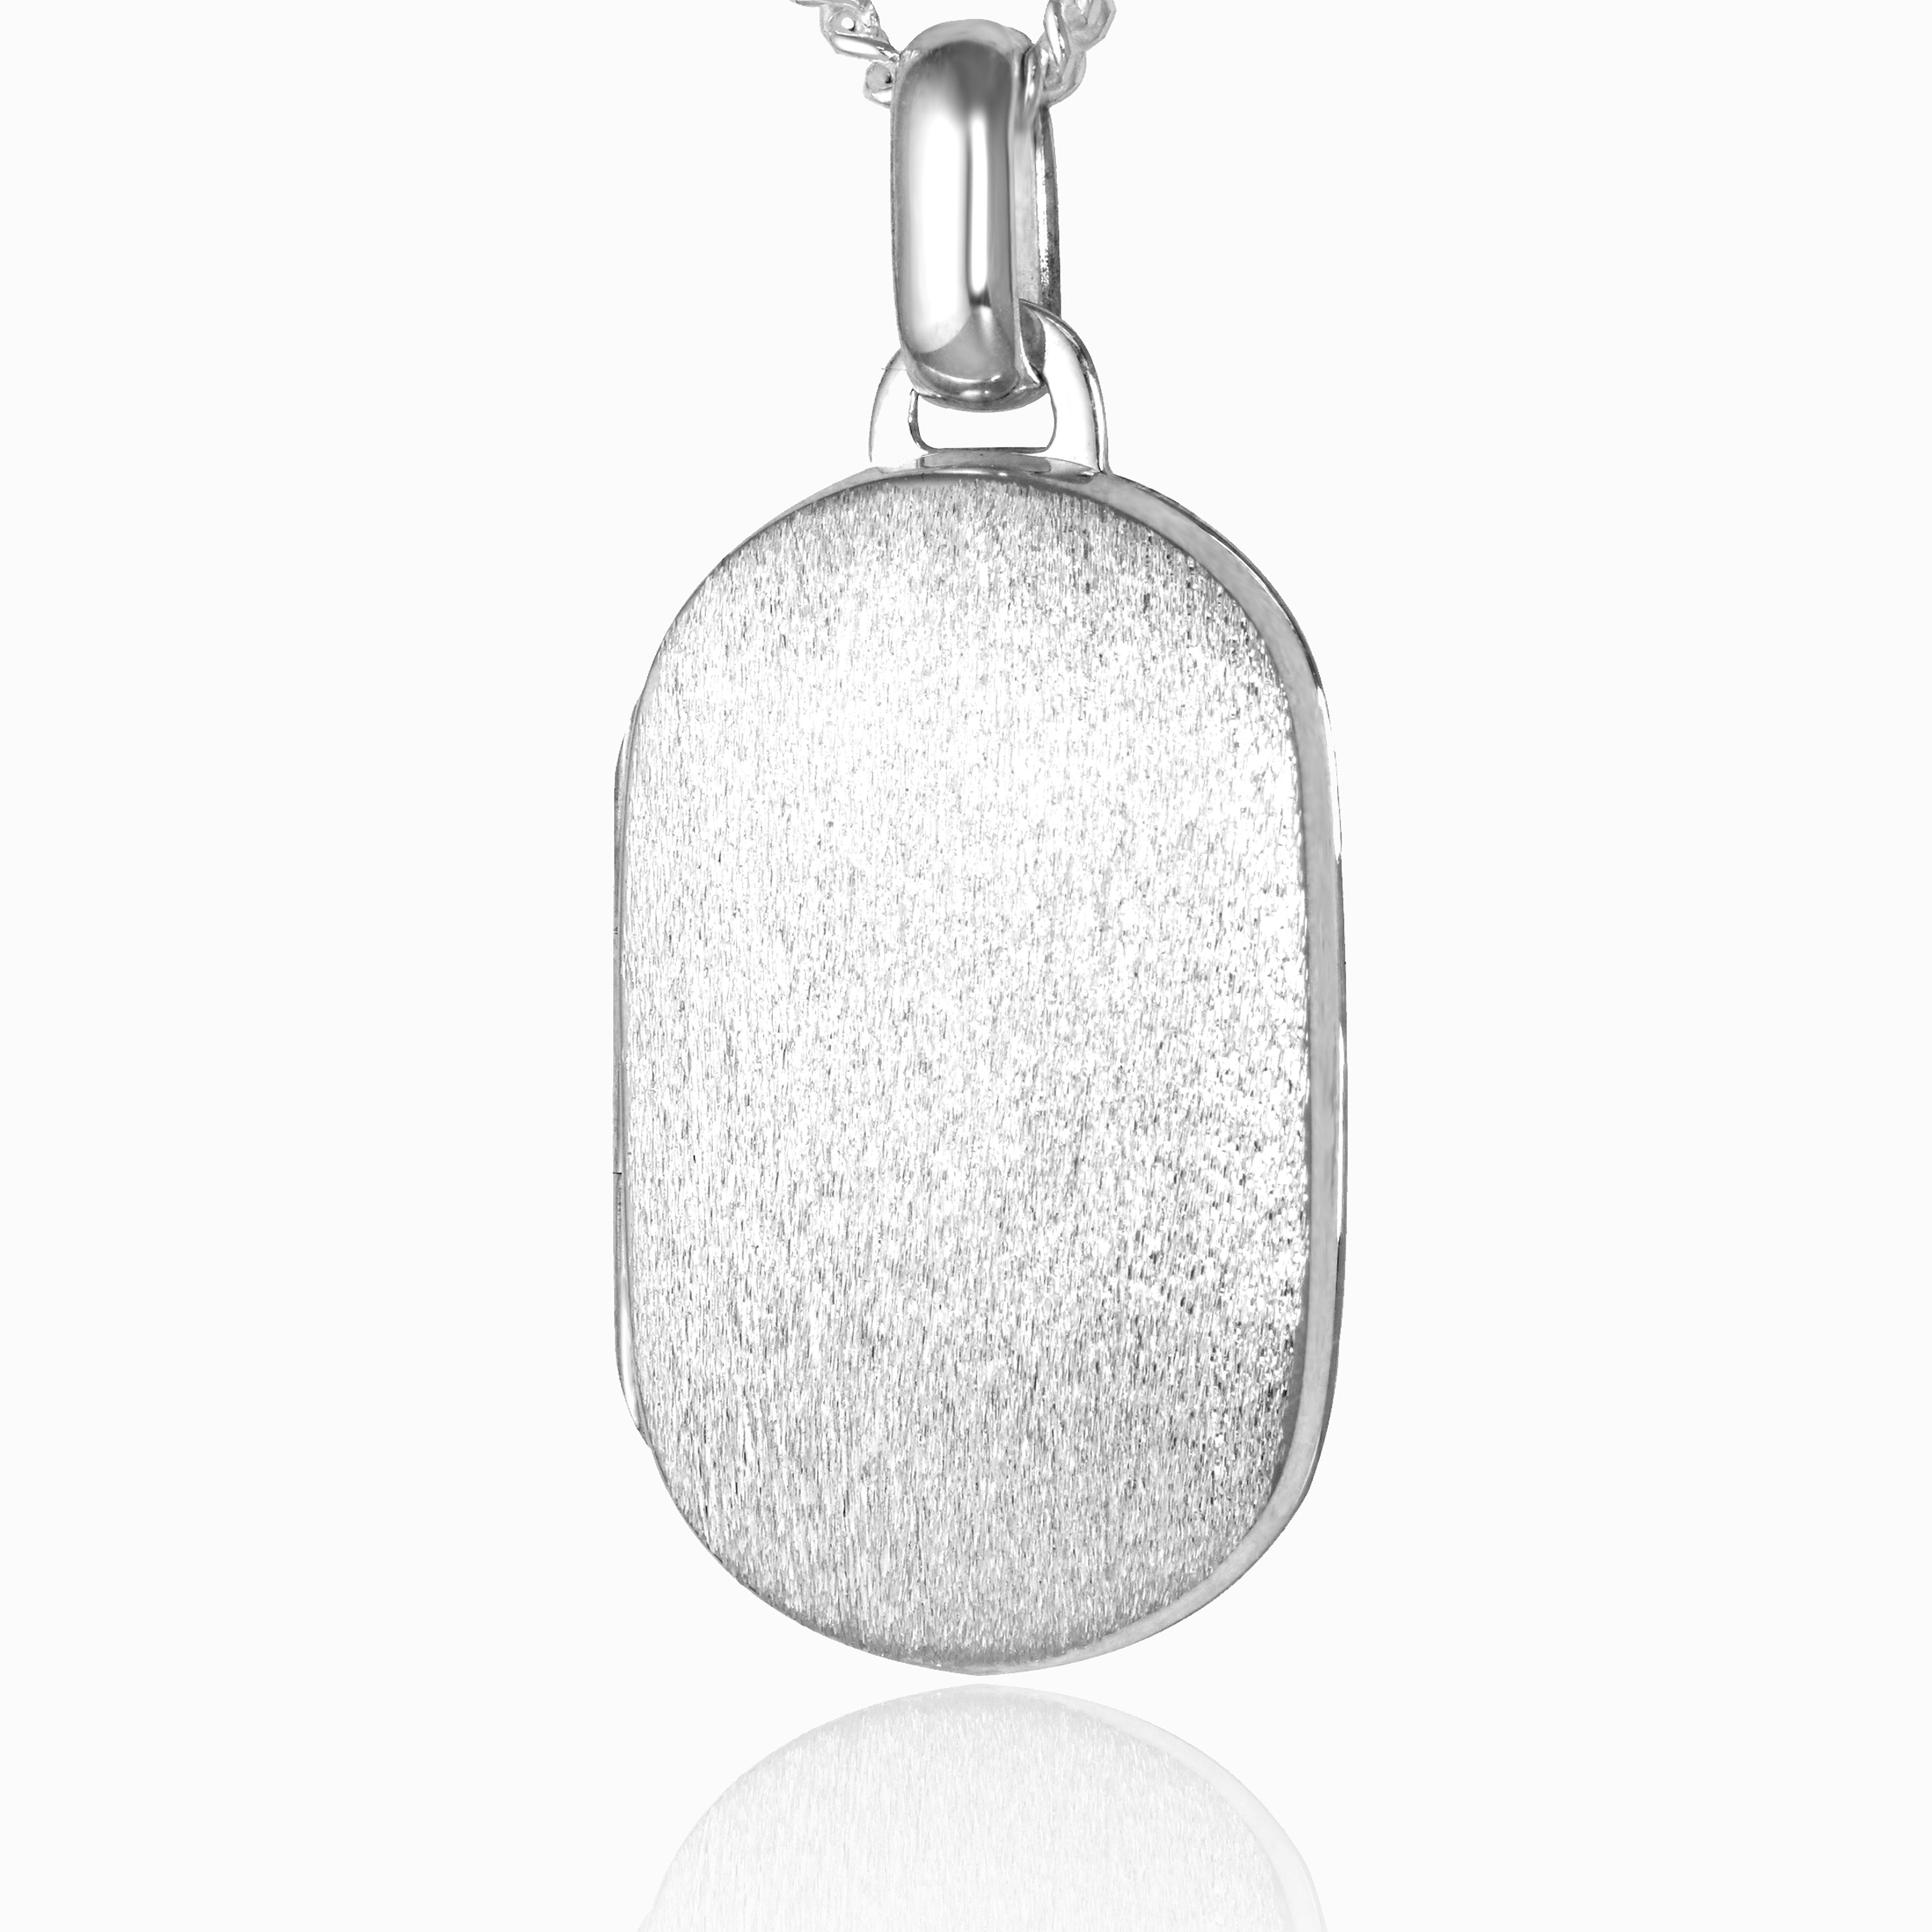 Product title: Frosted Dog Tag Locket, product type: Locket